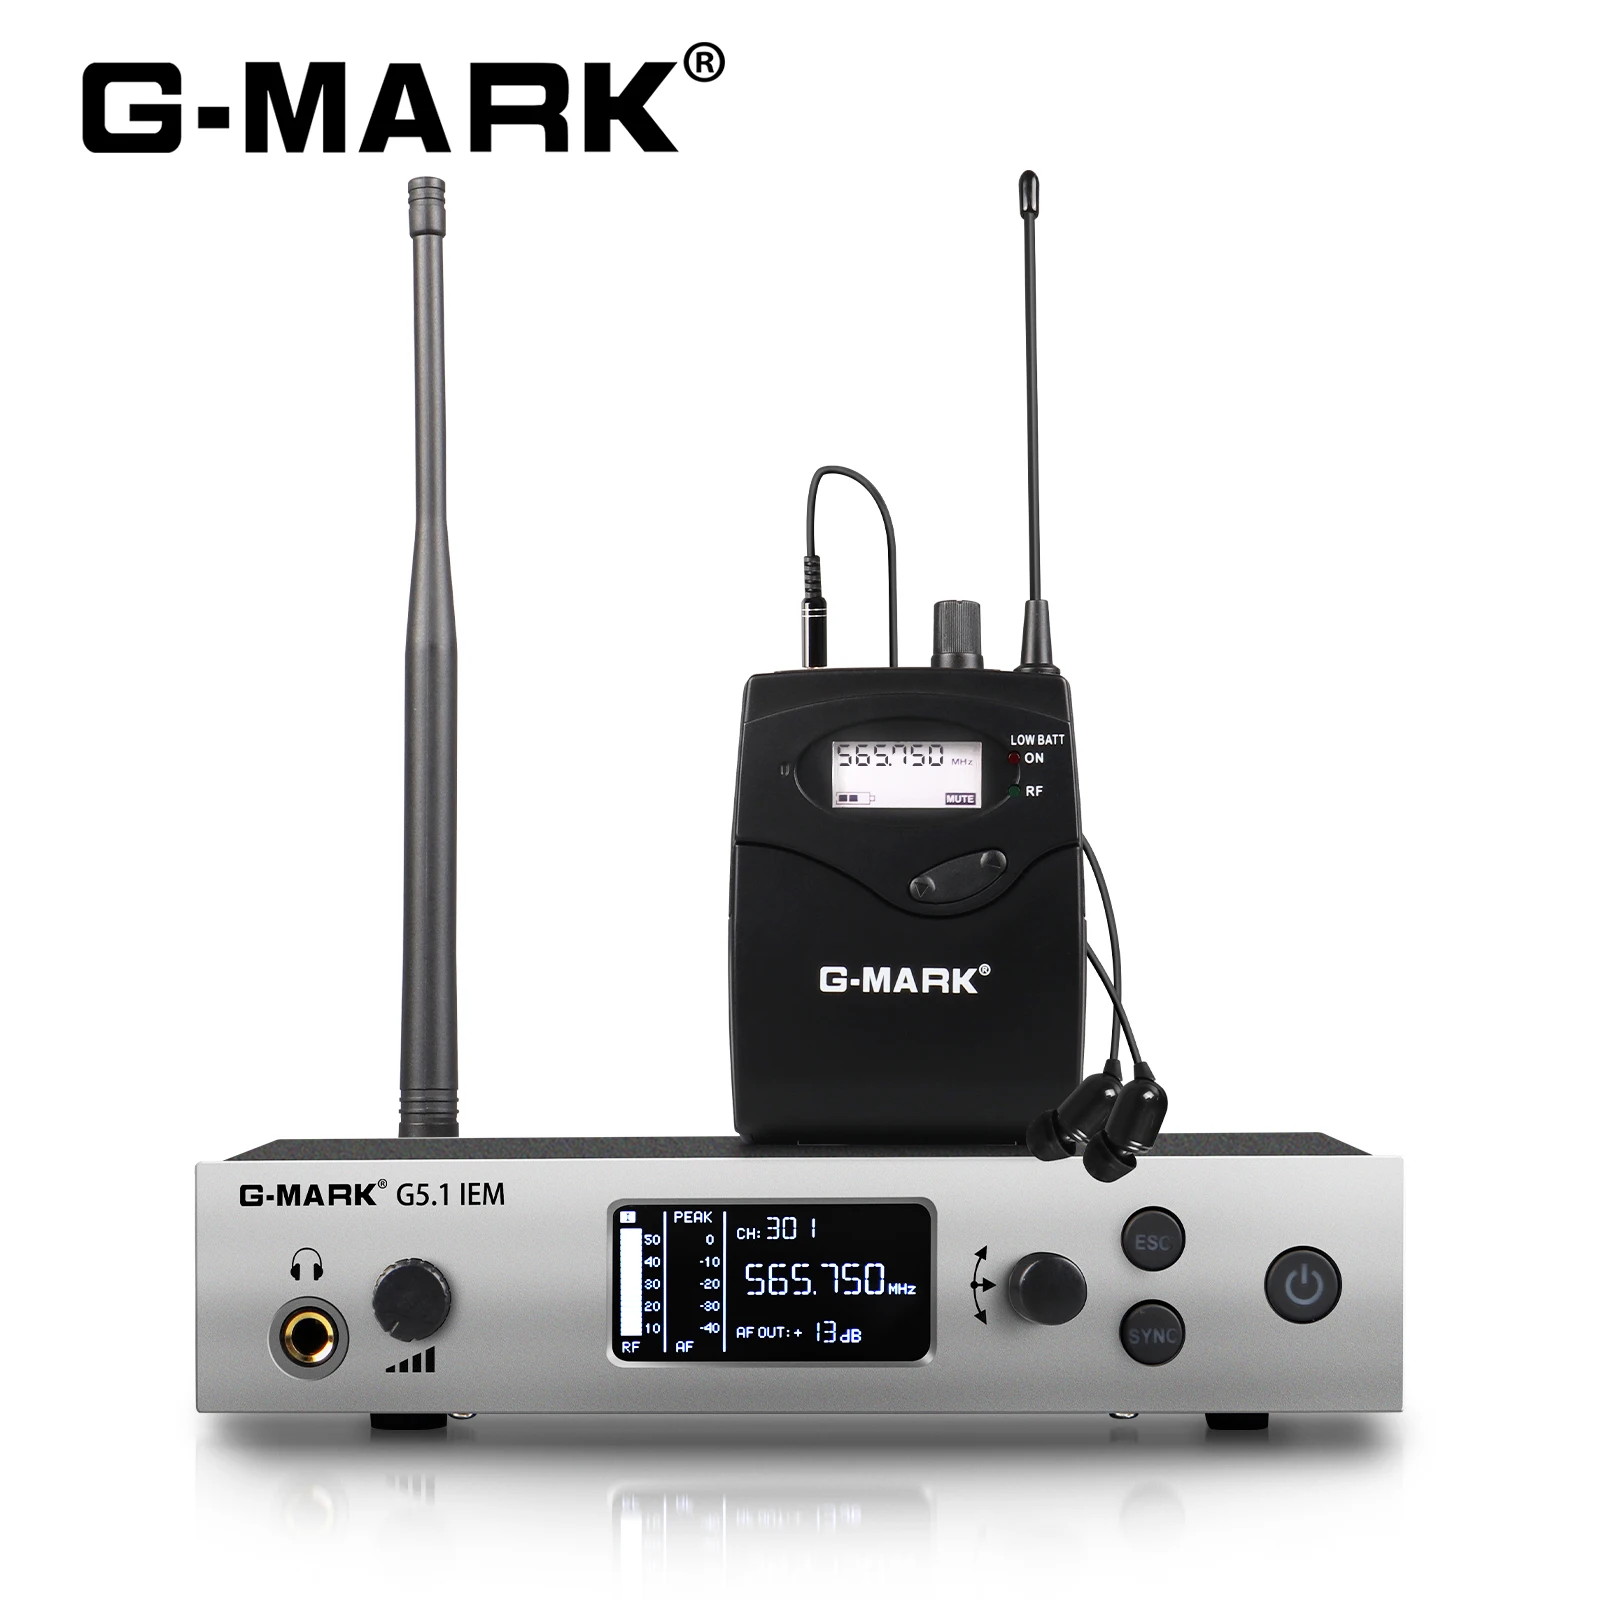 

In Ear Monitor G-MARK G5.1IEM Single Channel UHF Wireless Stage Return With In Earphone Metal Body For Band Recording Studio